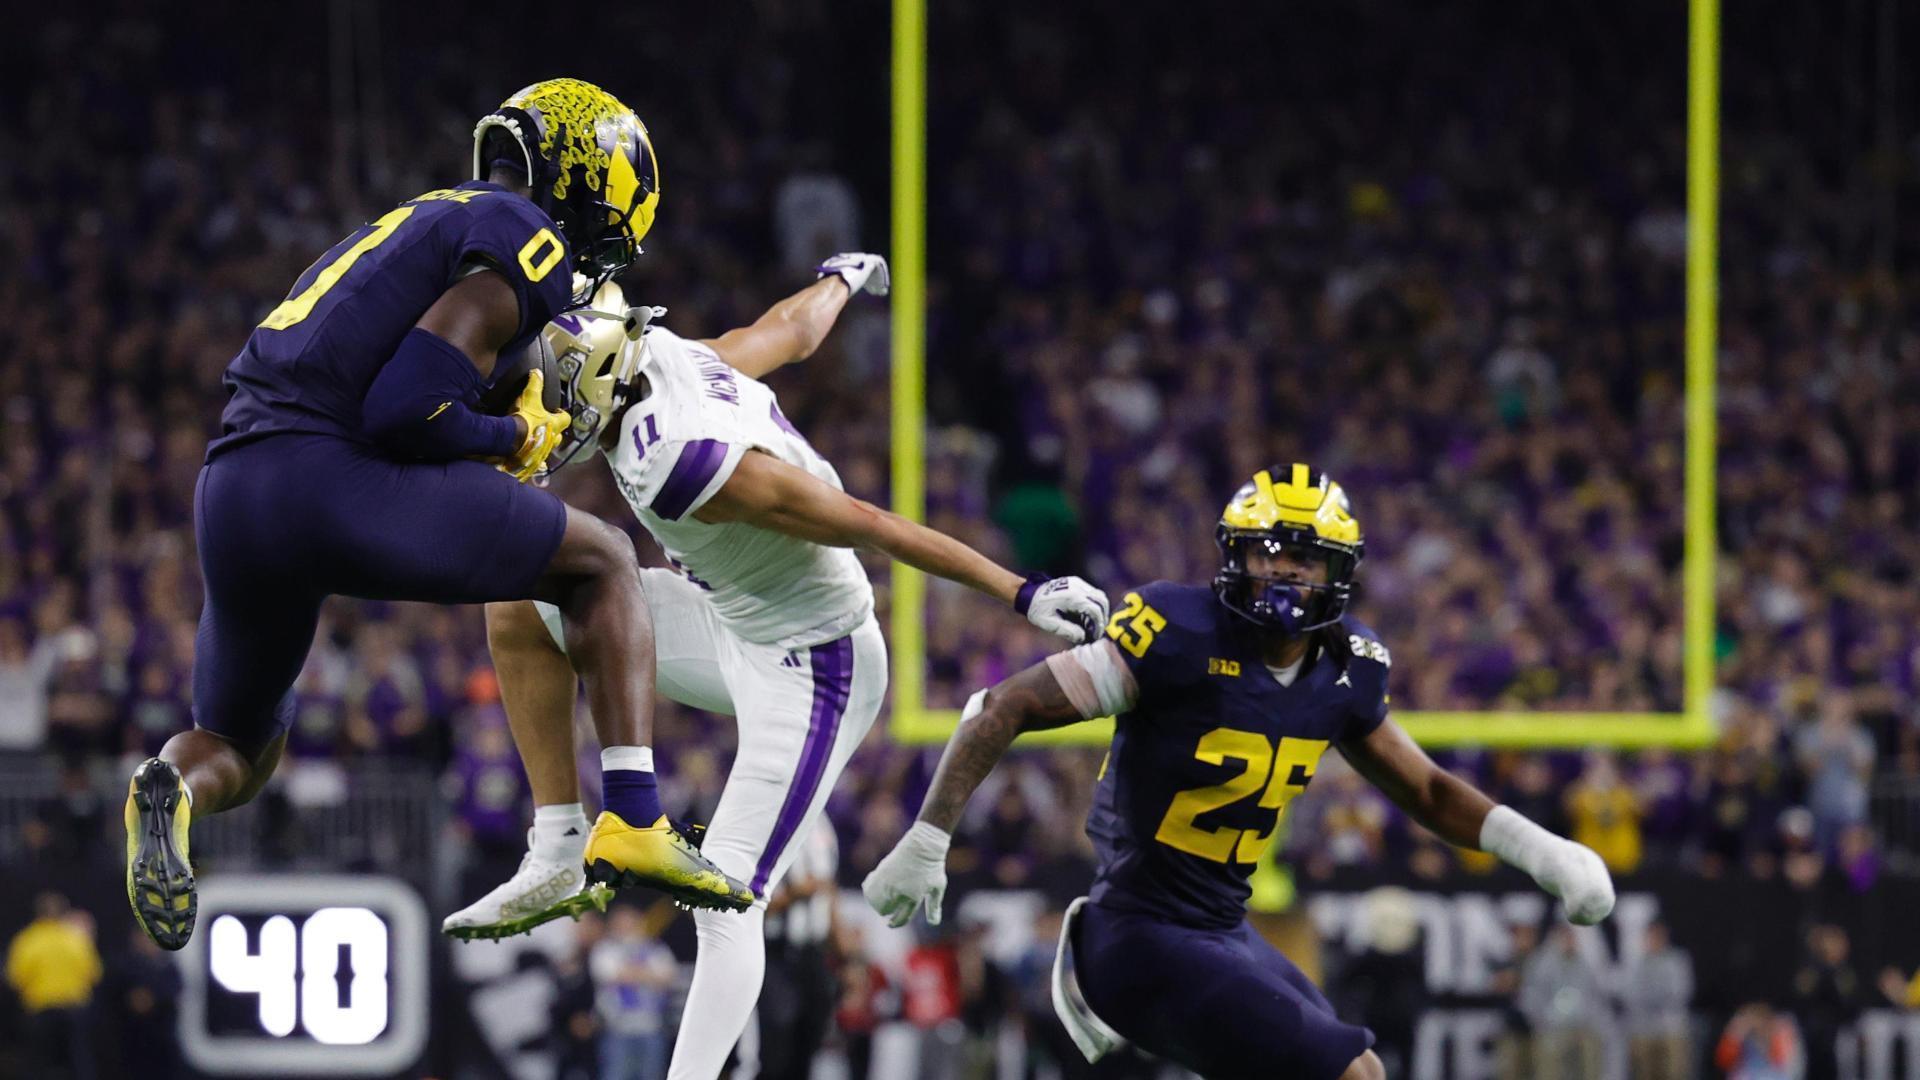 Michigan's INT of Penix all but ices CFP title game